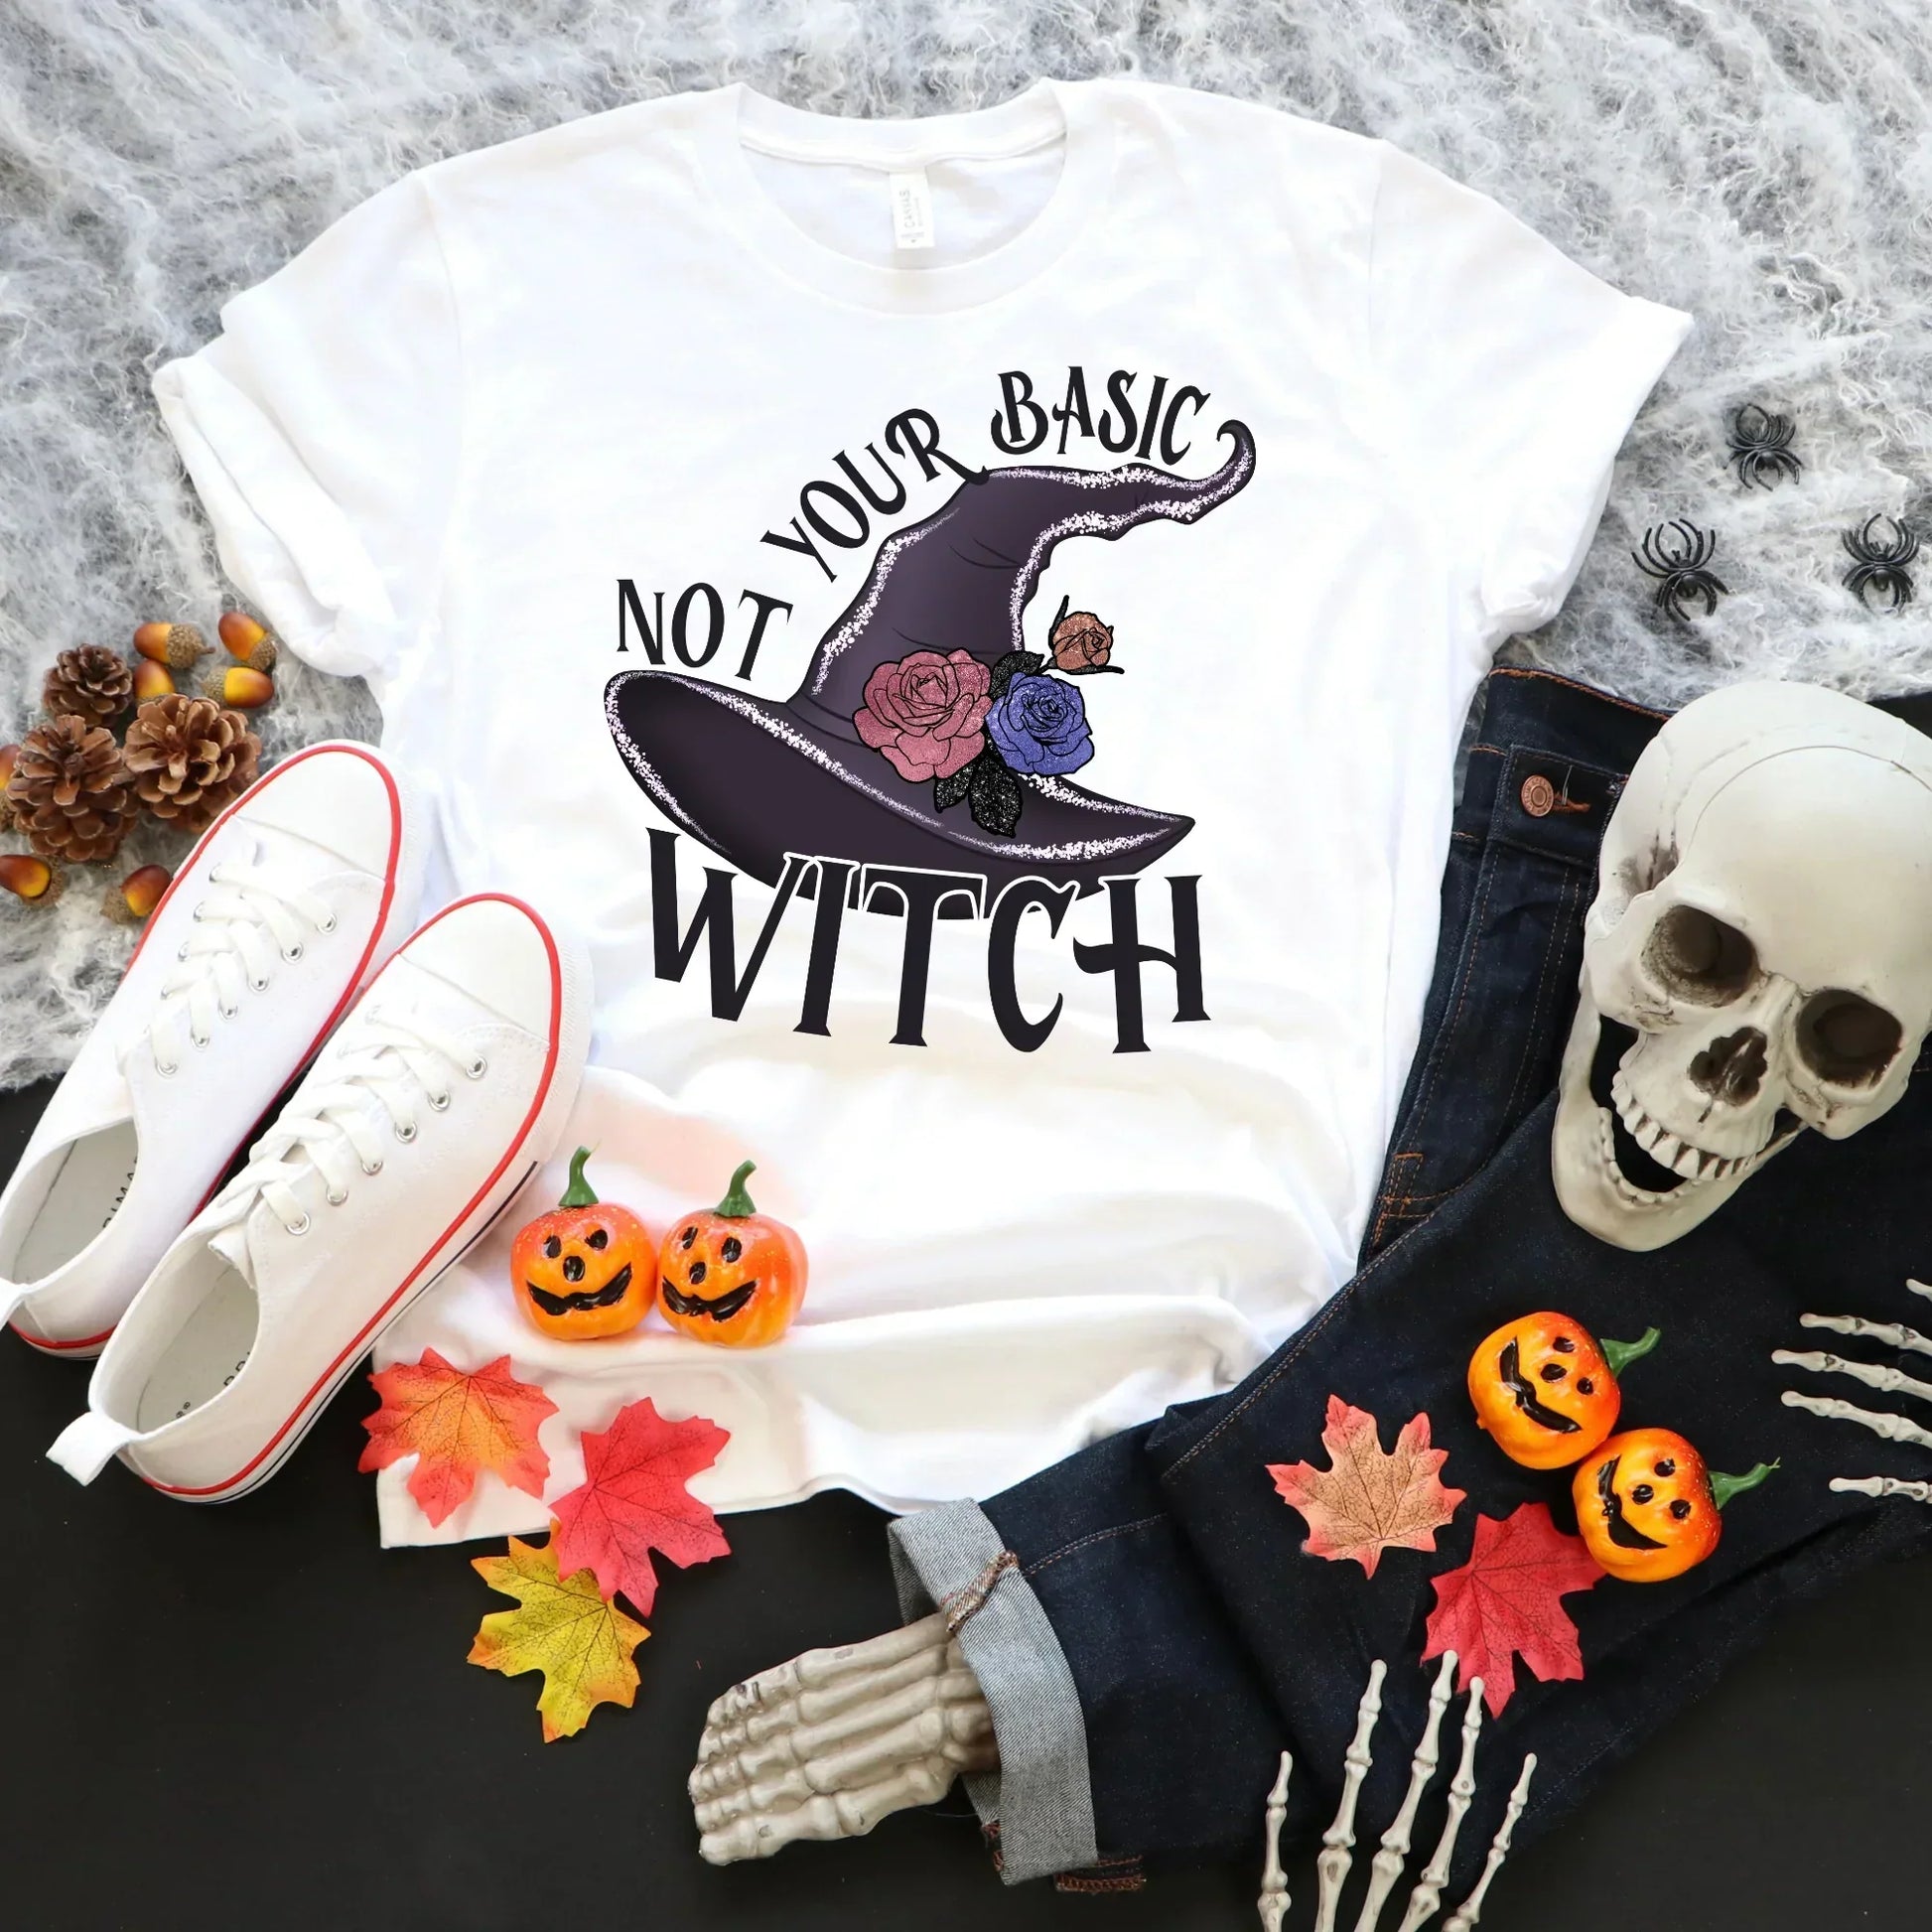 Not your Basic Witch, Gothic Shirt, Witchy Vibes Tee